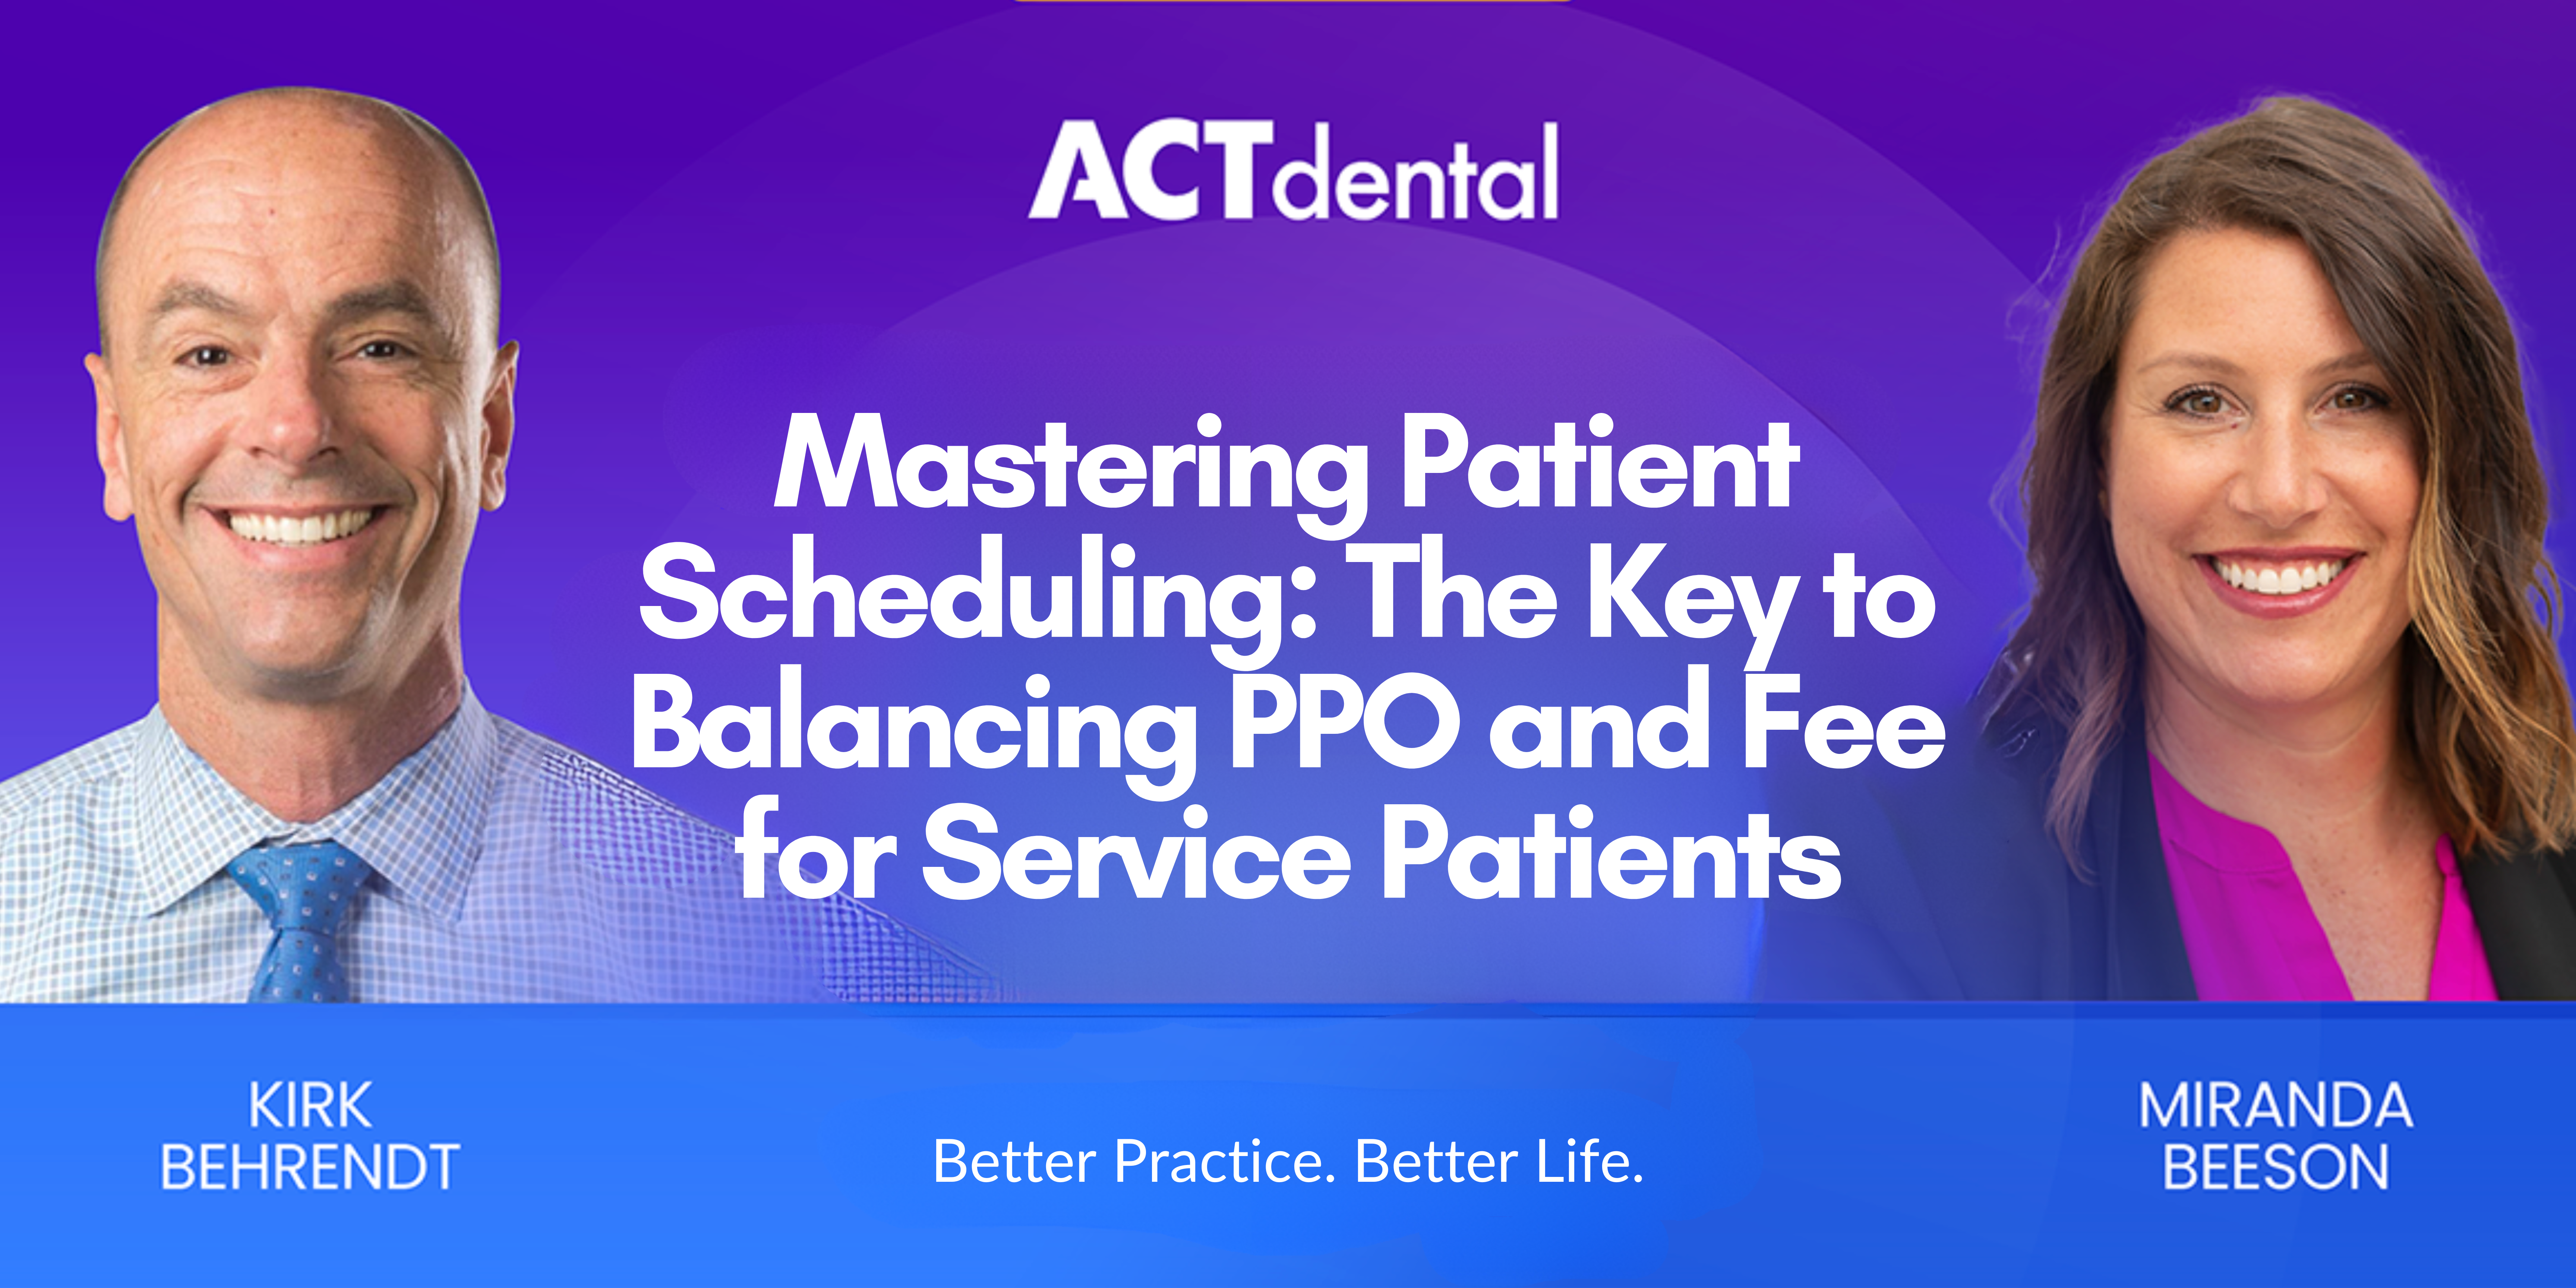 Mastering Patient Scheduling: The Key to Balancing PPO and Fee for Service Patients